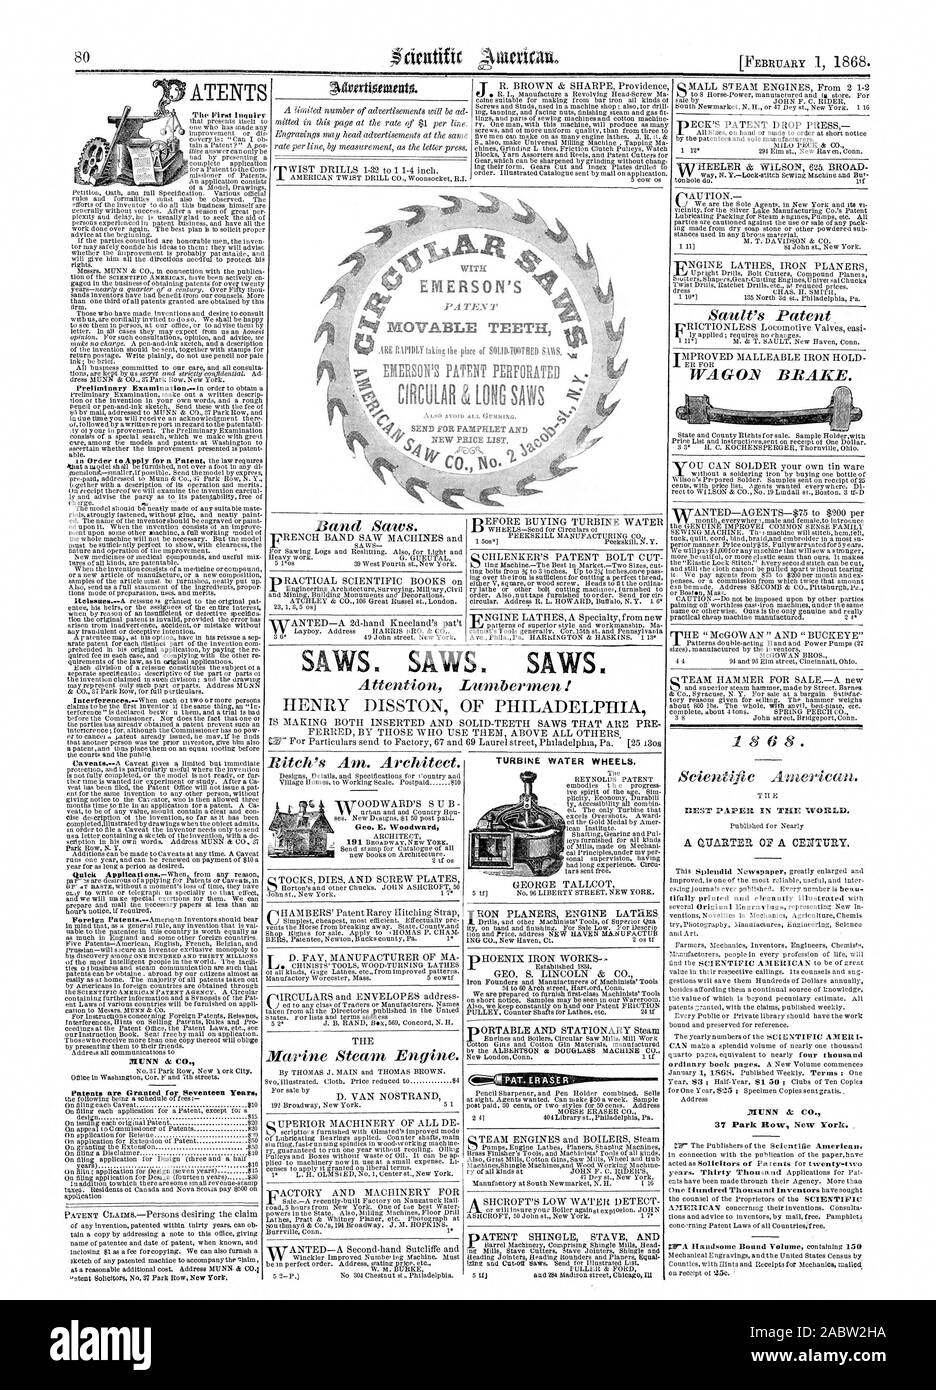 80 SEND FOR PAMPHLET AND NEW PRICE LIST )Gtls SAWS SAWS SAWS 37 Park Row New York., scientific american, 1868-02-01 Stock Photo